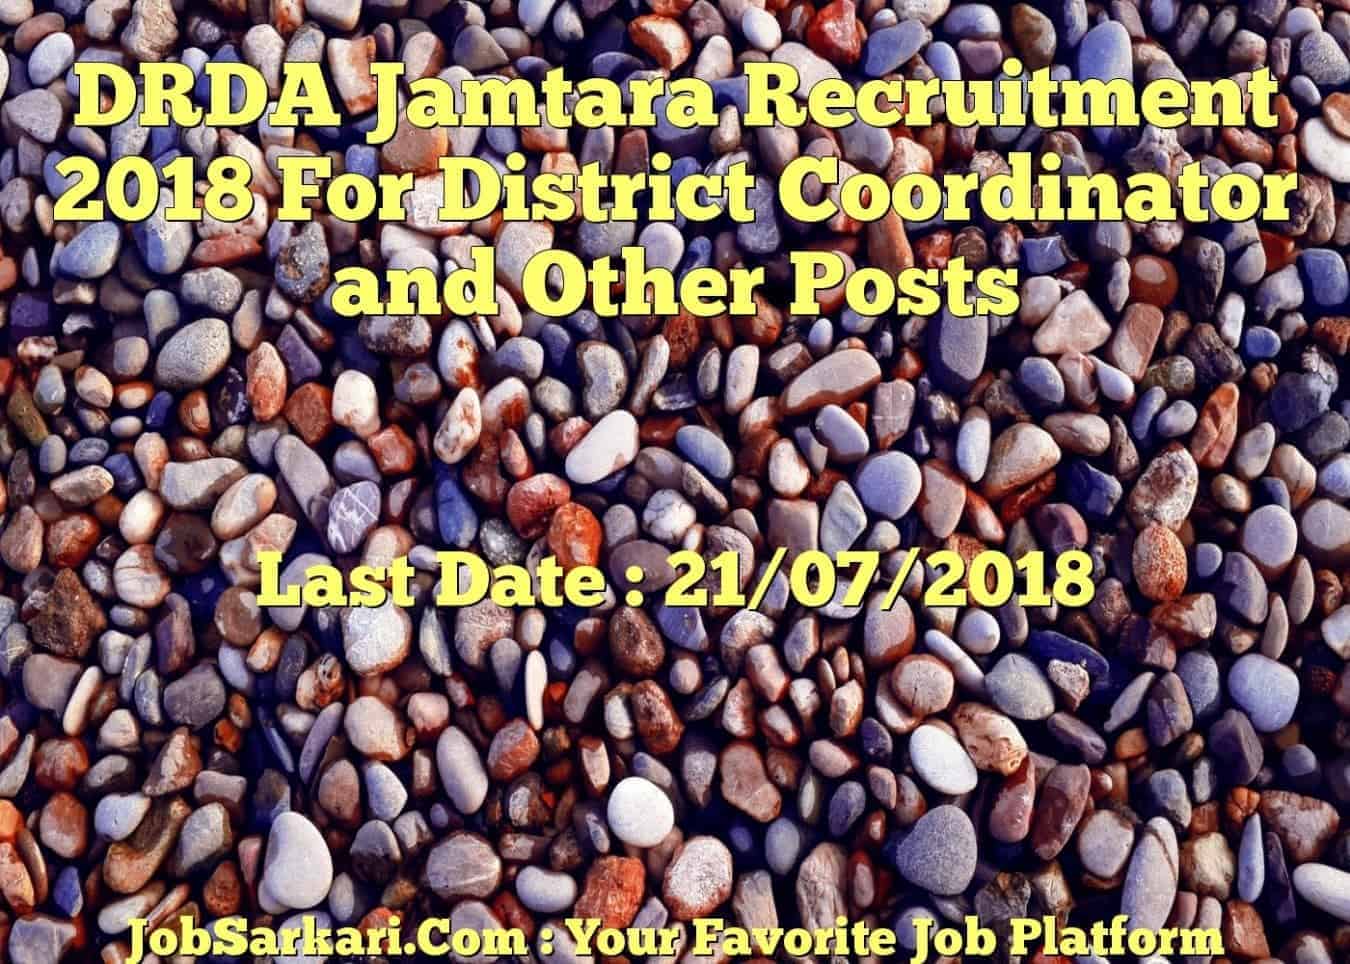 DRDA Jamtara Recruitment 2018 For District Coordinator and Other Posts